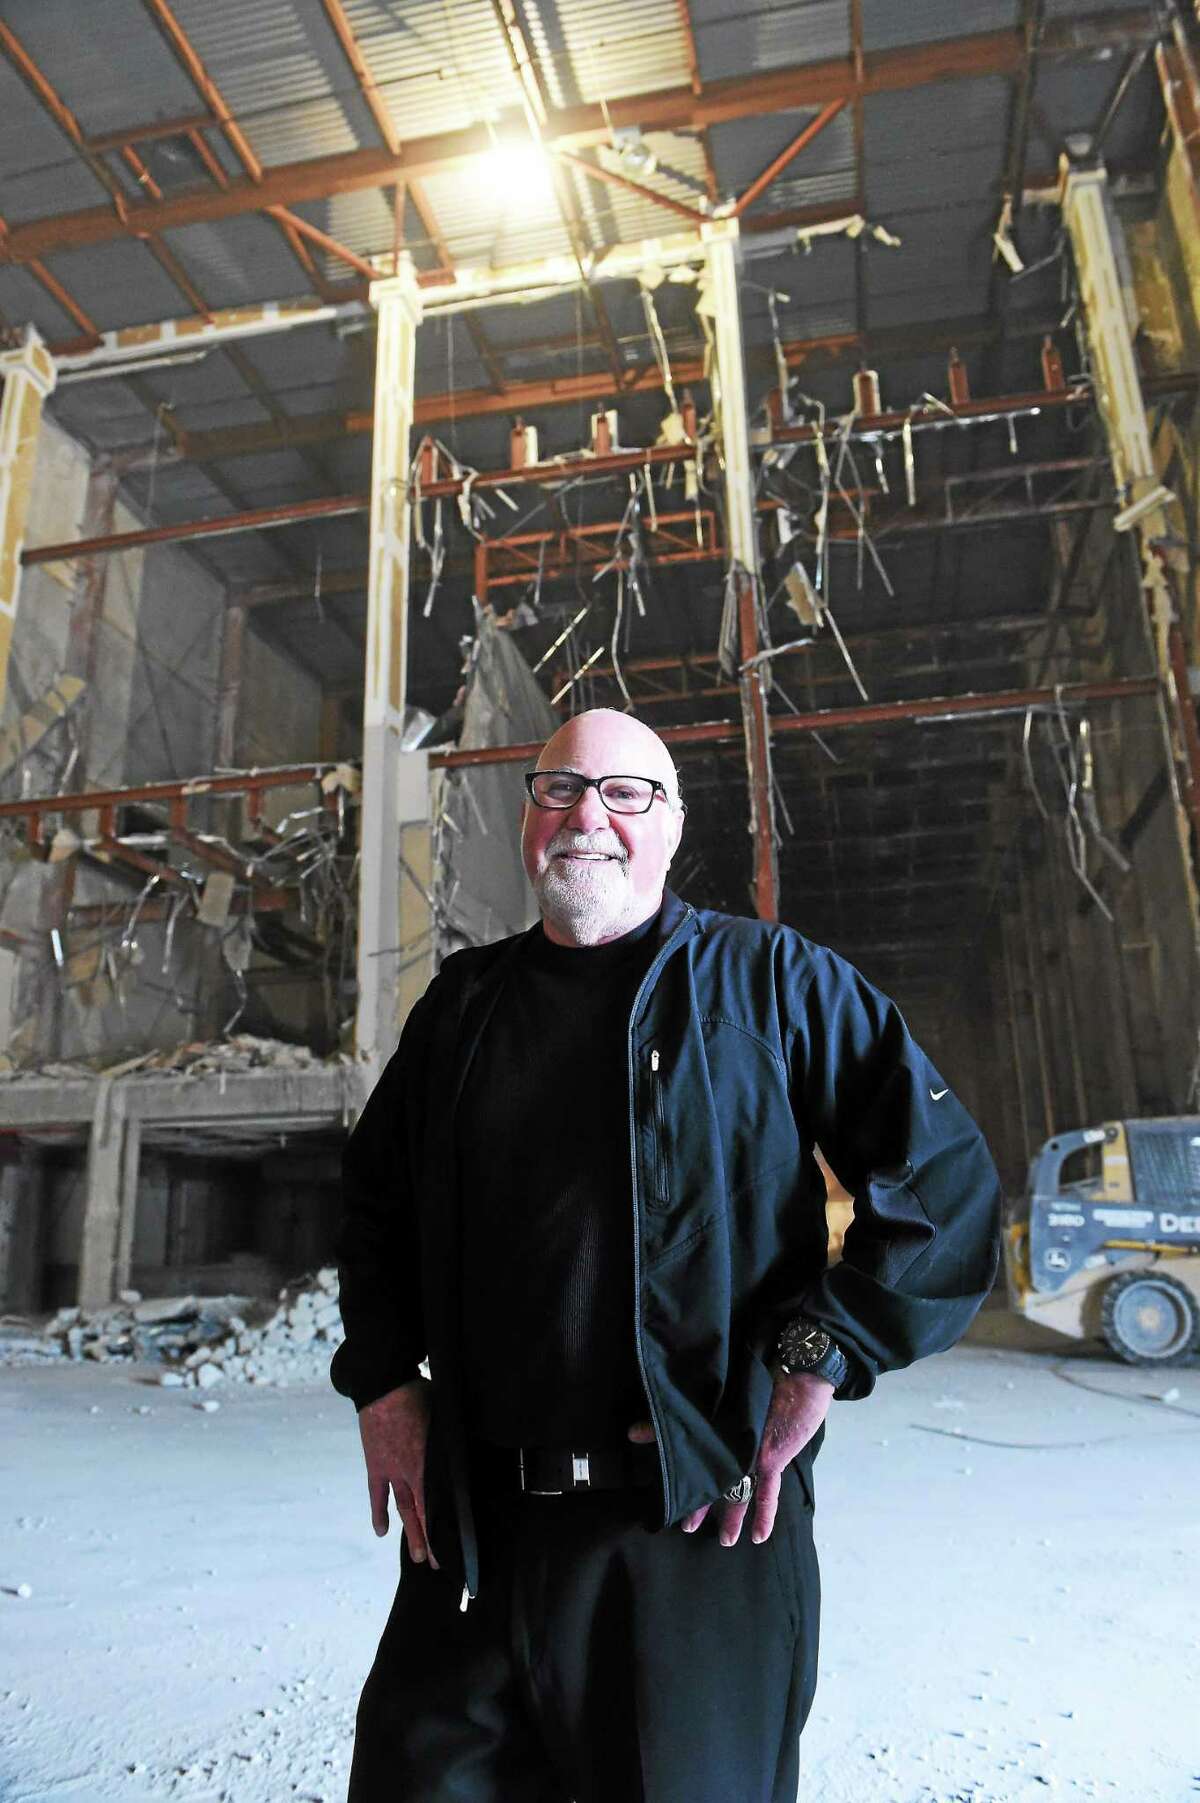 Eliot Tatelman, president and CEO of Jordan’s Furniture, poses for a portrait in what used to be the New Haven Register pressroom after a ground-breaking ceremony Wednesday for the new furniture store at the Register’s former Sargent Drive building.